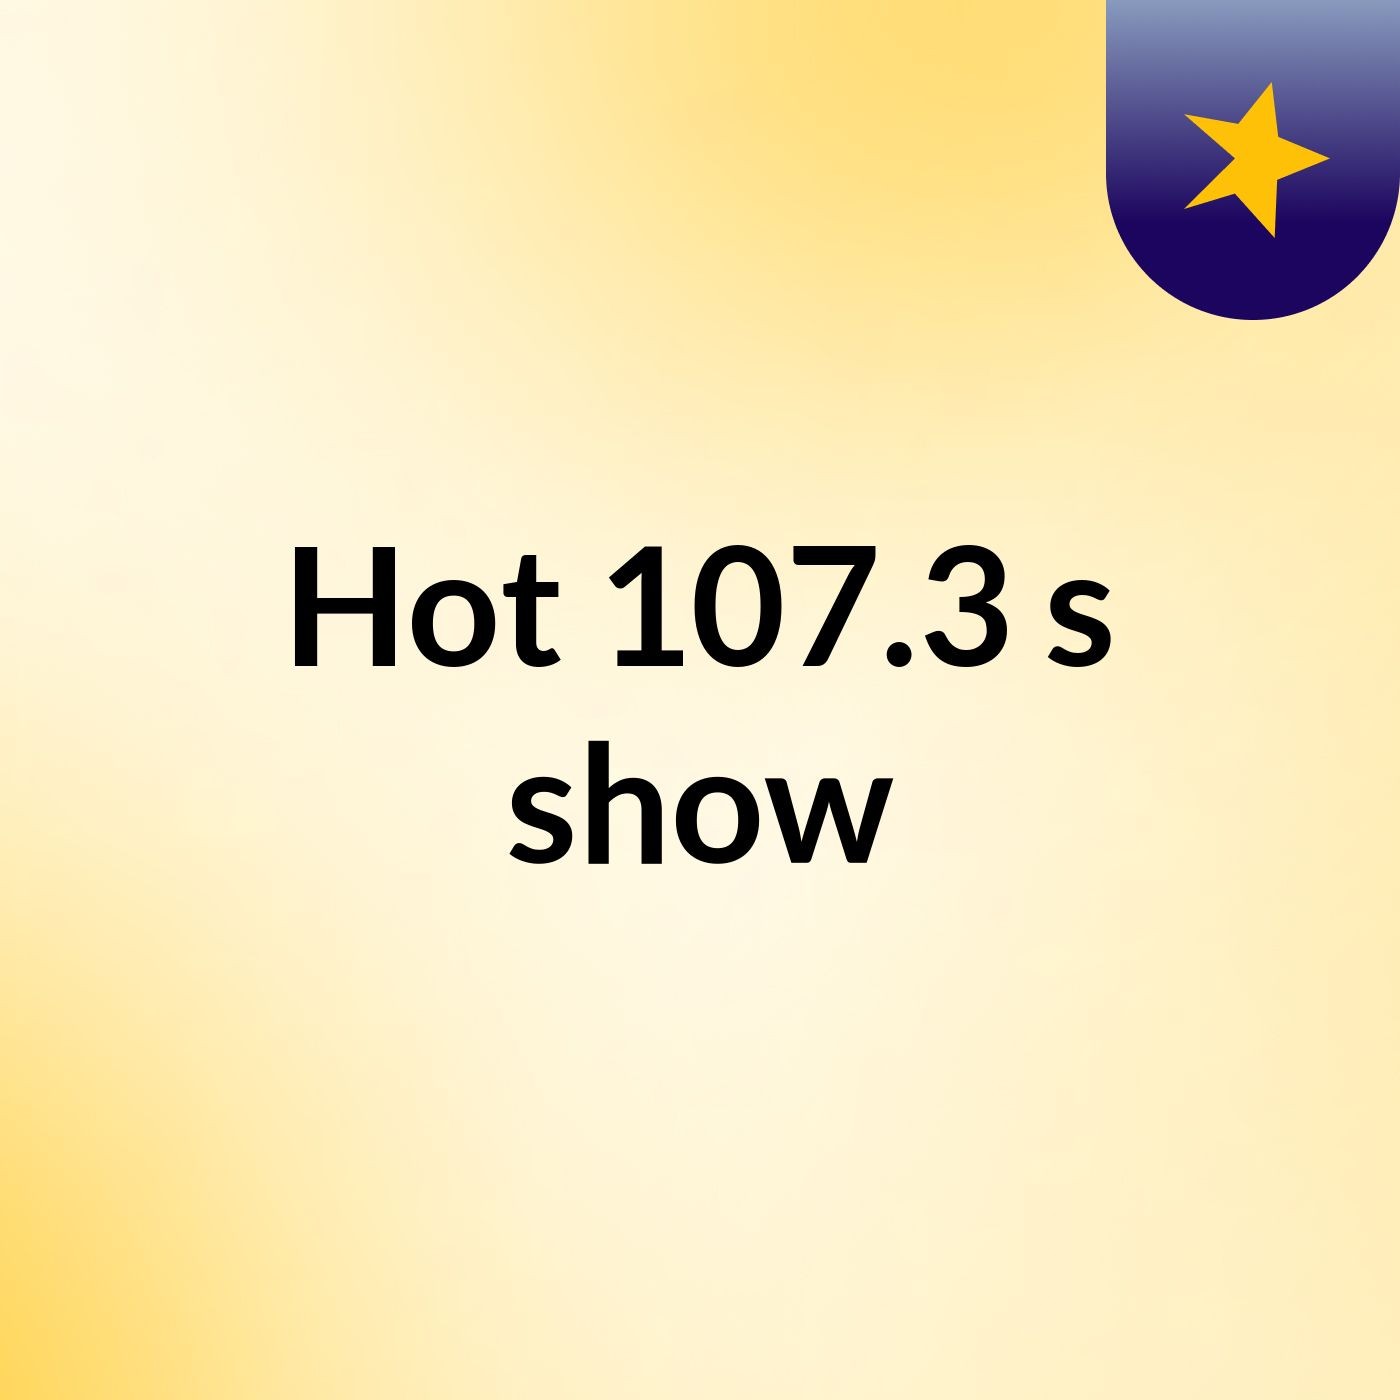 Hot 107.3's show